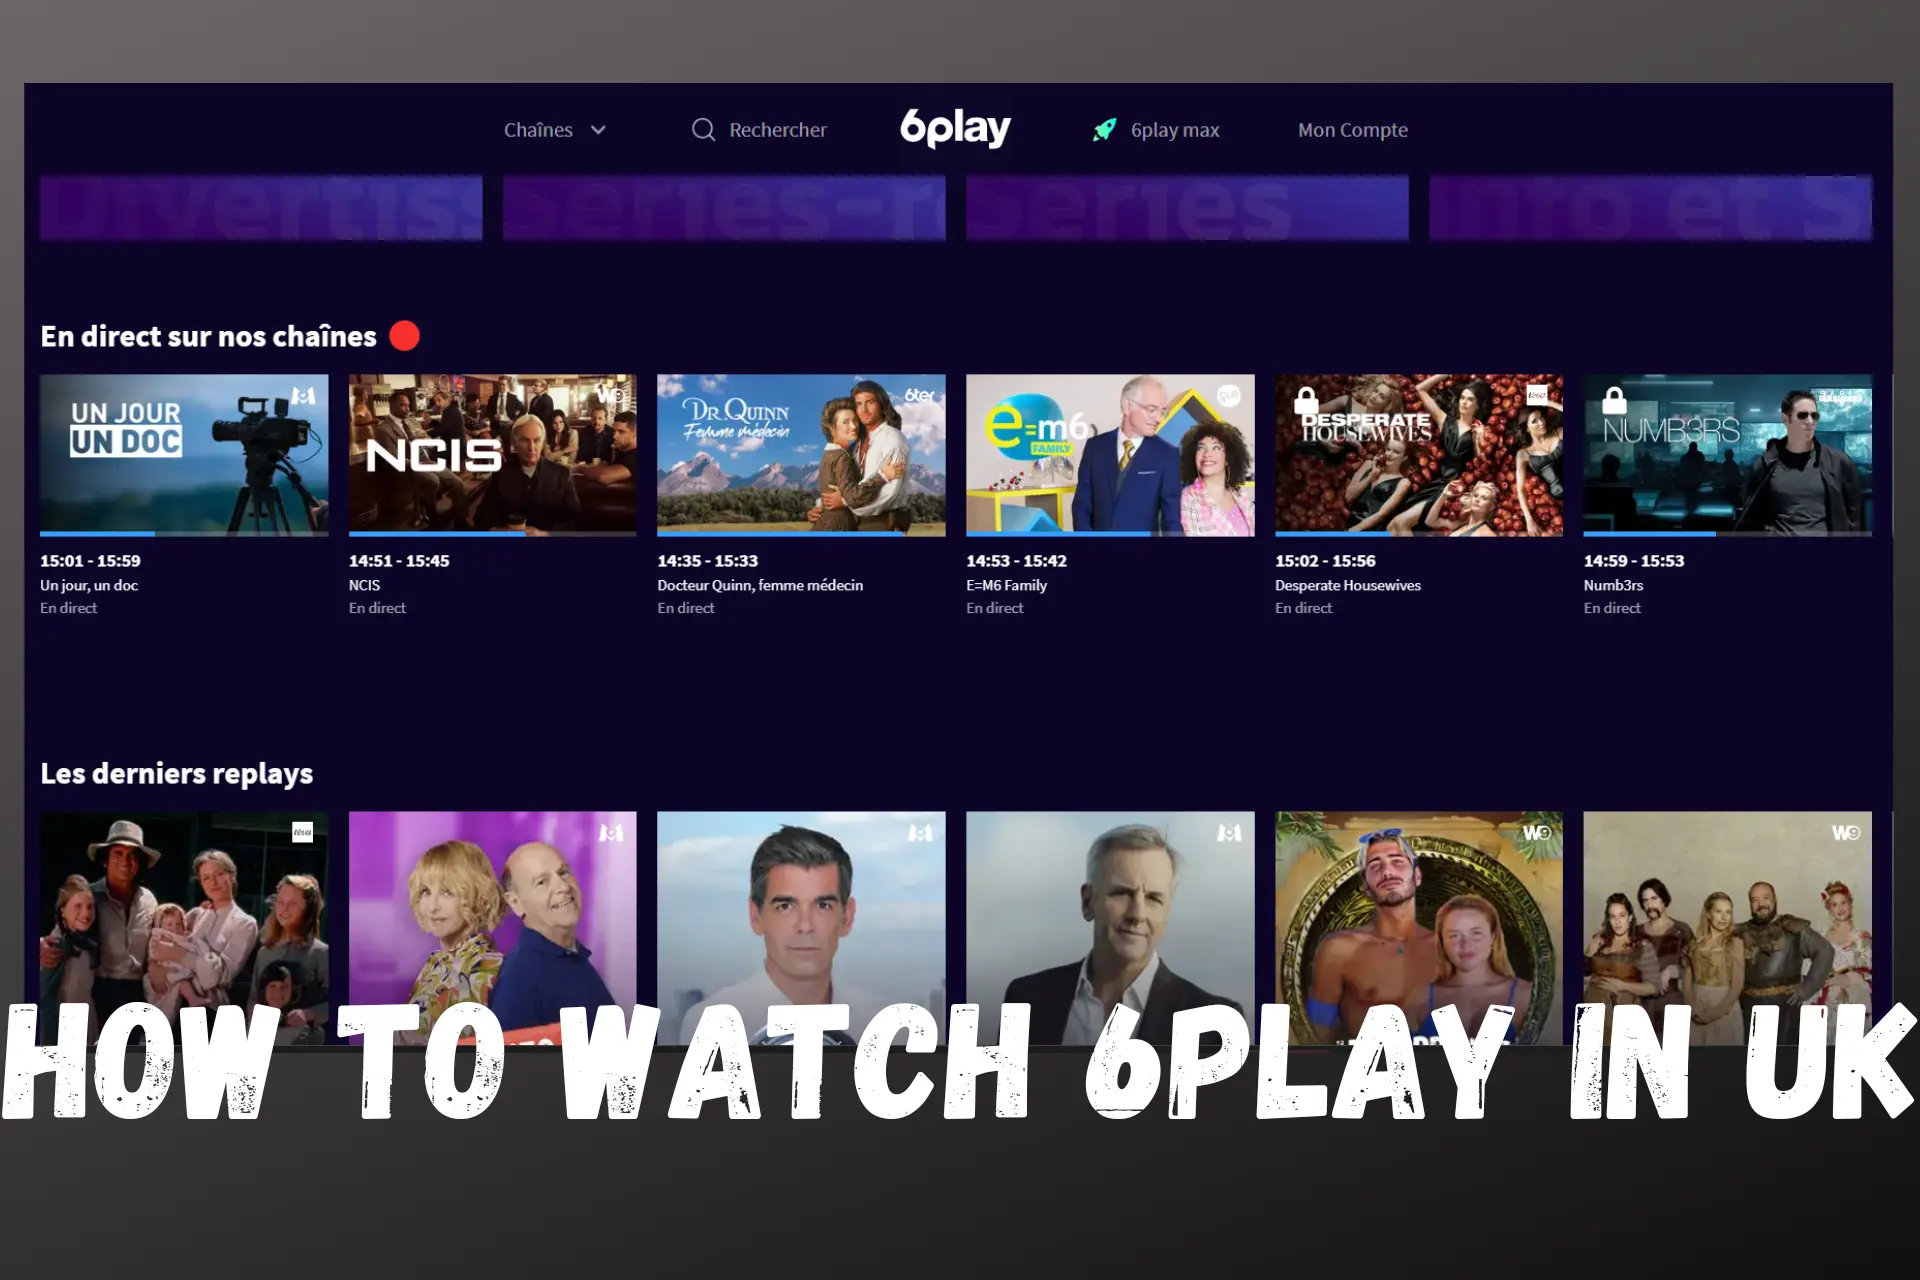 How Can I Watch 6Play In The UK? [Easy Unblock]